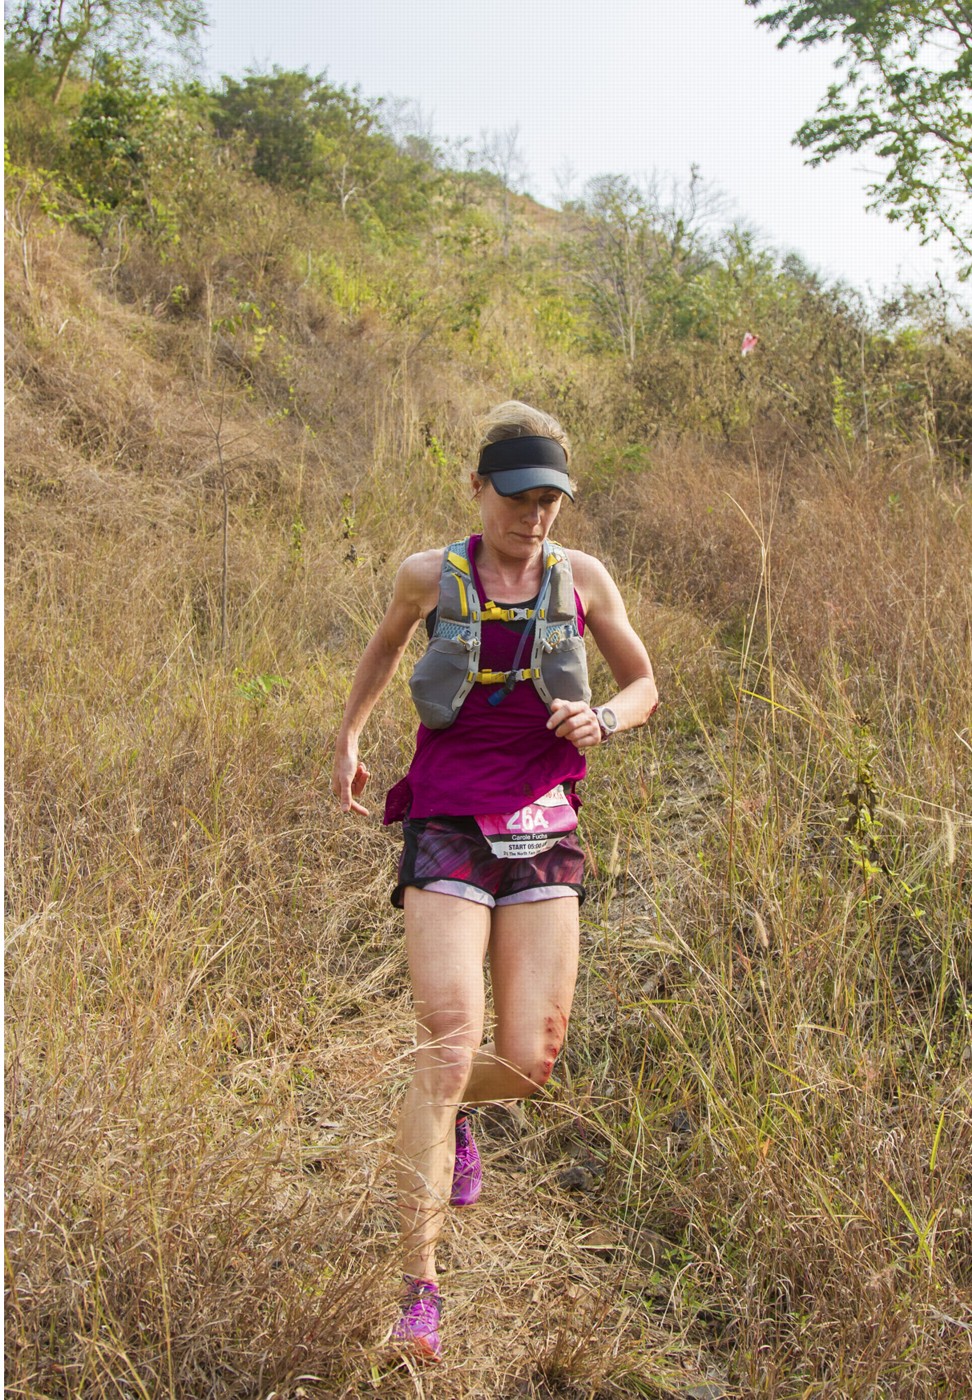 Carole Fuchs is a French lawyer based in Bangkok and a passionate trail runner.